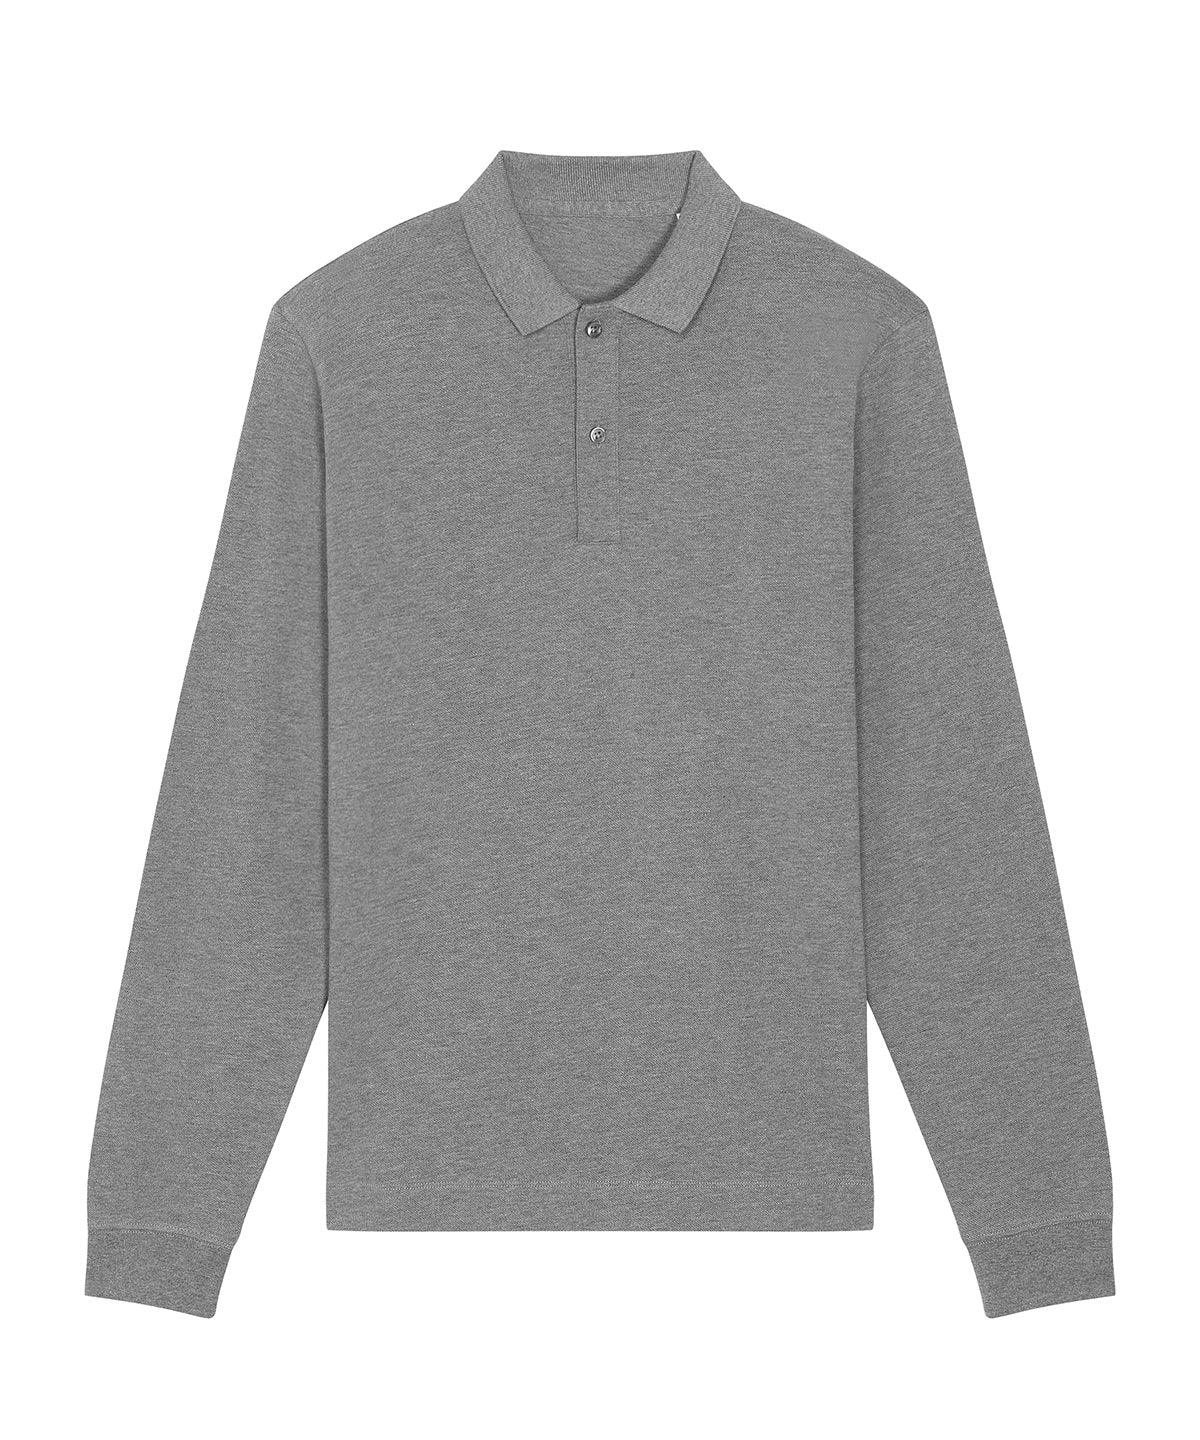 Mid Heather Grey - Prepster long sleeve unisex polo (STPU332) Polos Stanley/Stella Exclusives, New For 2021, New In Autumn Winter, New In Mid Year, Organic & Conscious, Polos & Casual, Raladeal - Stanley Stella, Stanley/ Stella Schoolwear Centres